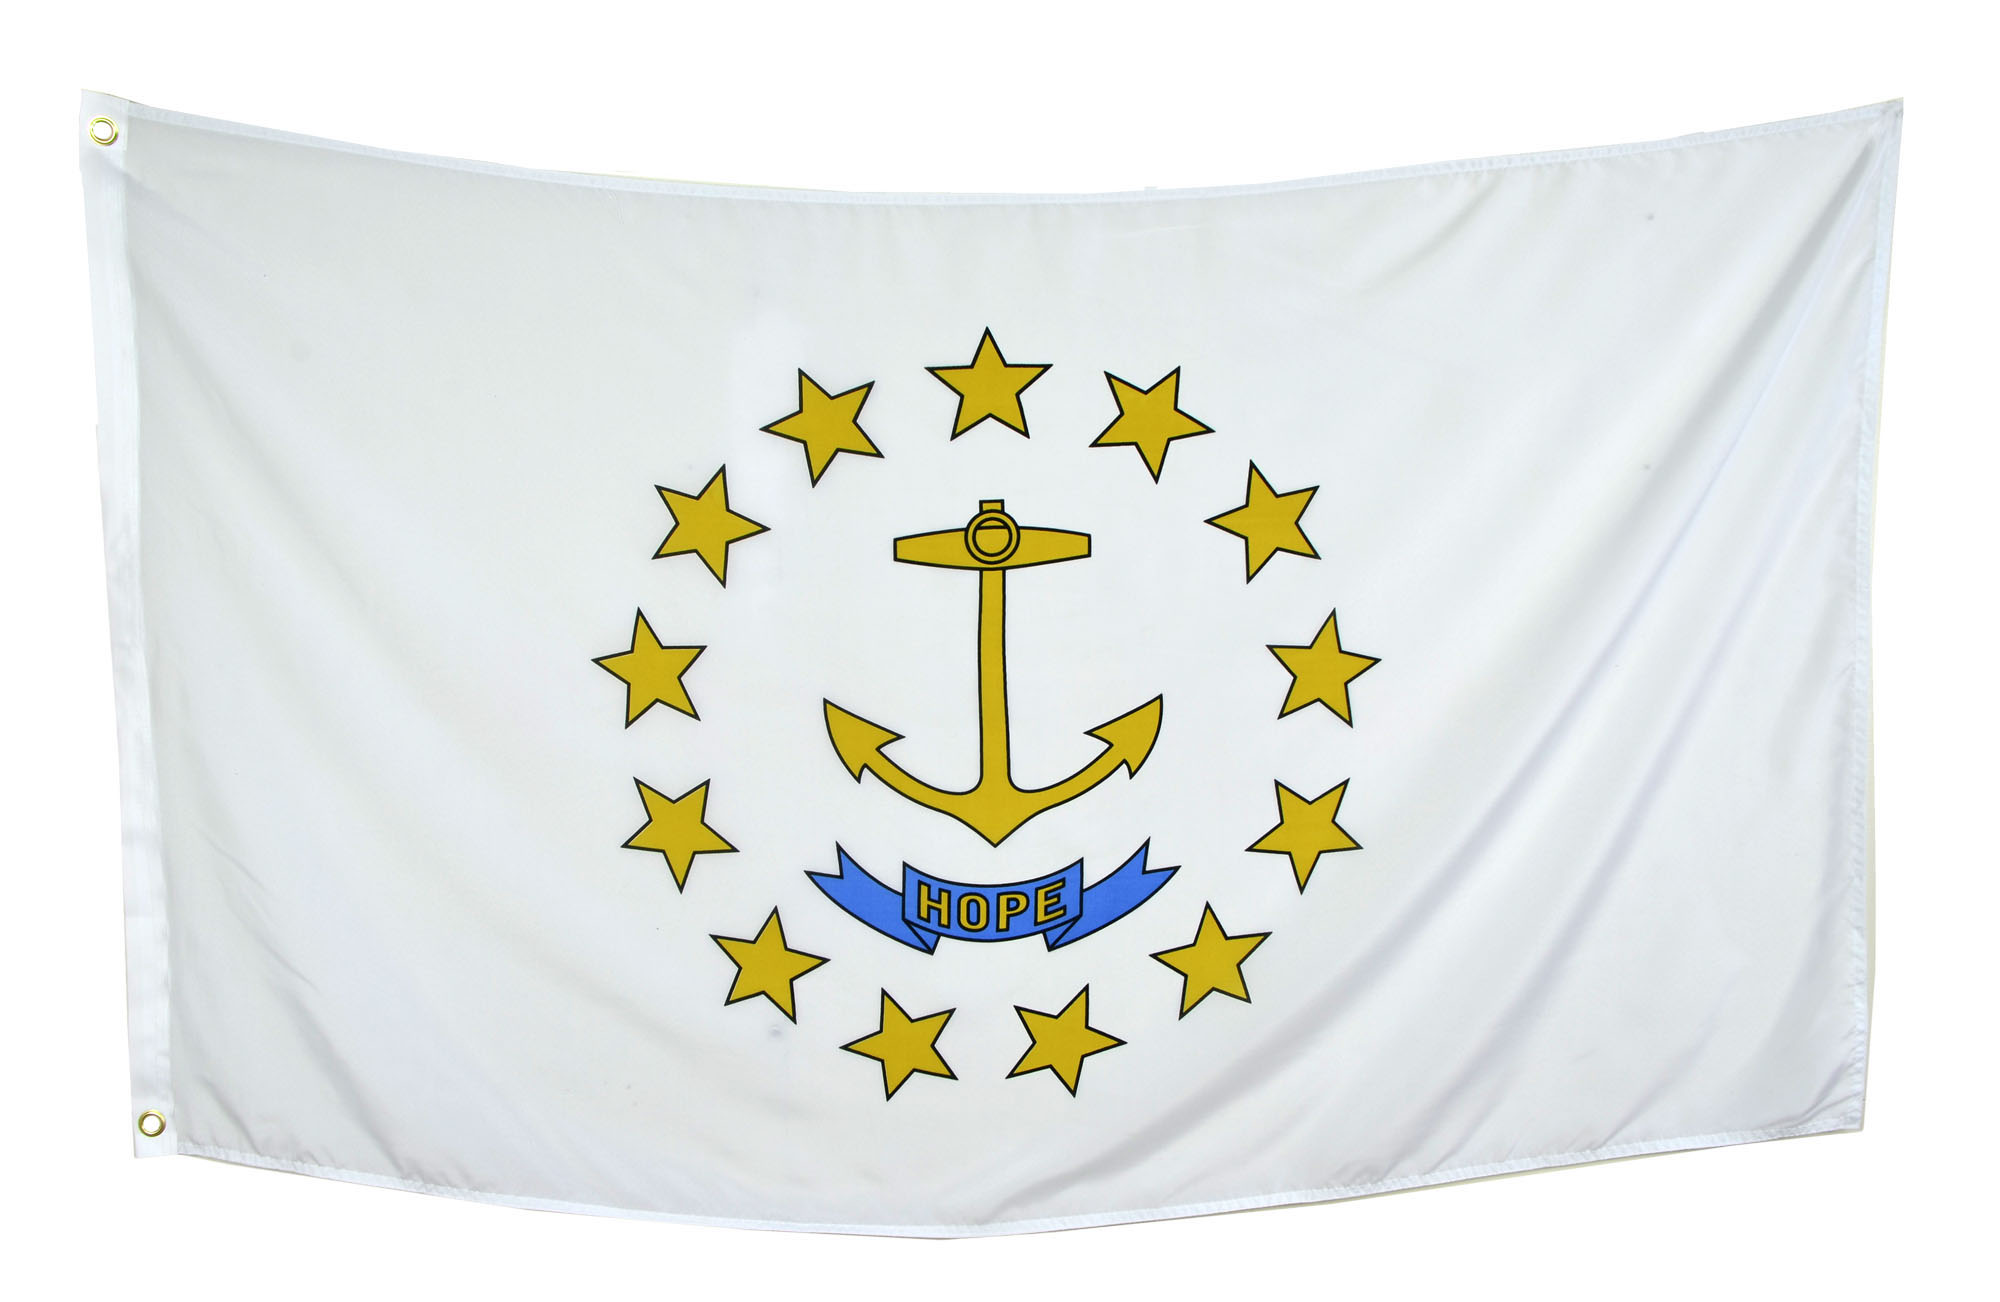 Shop72 US Rhode Island State Flags - Rhode Island Flag - 3x5' Flag from Sturdy 100D Polyester